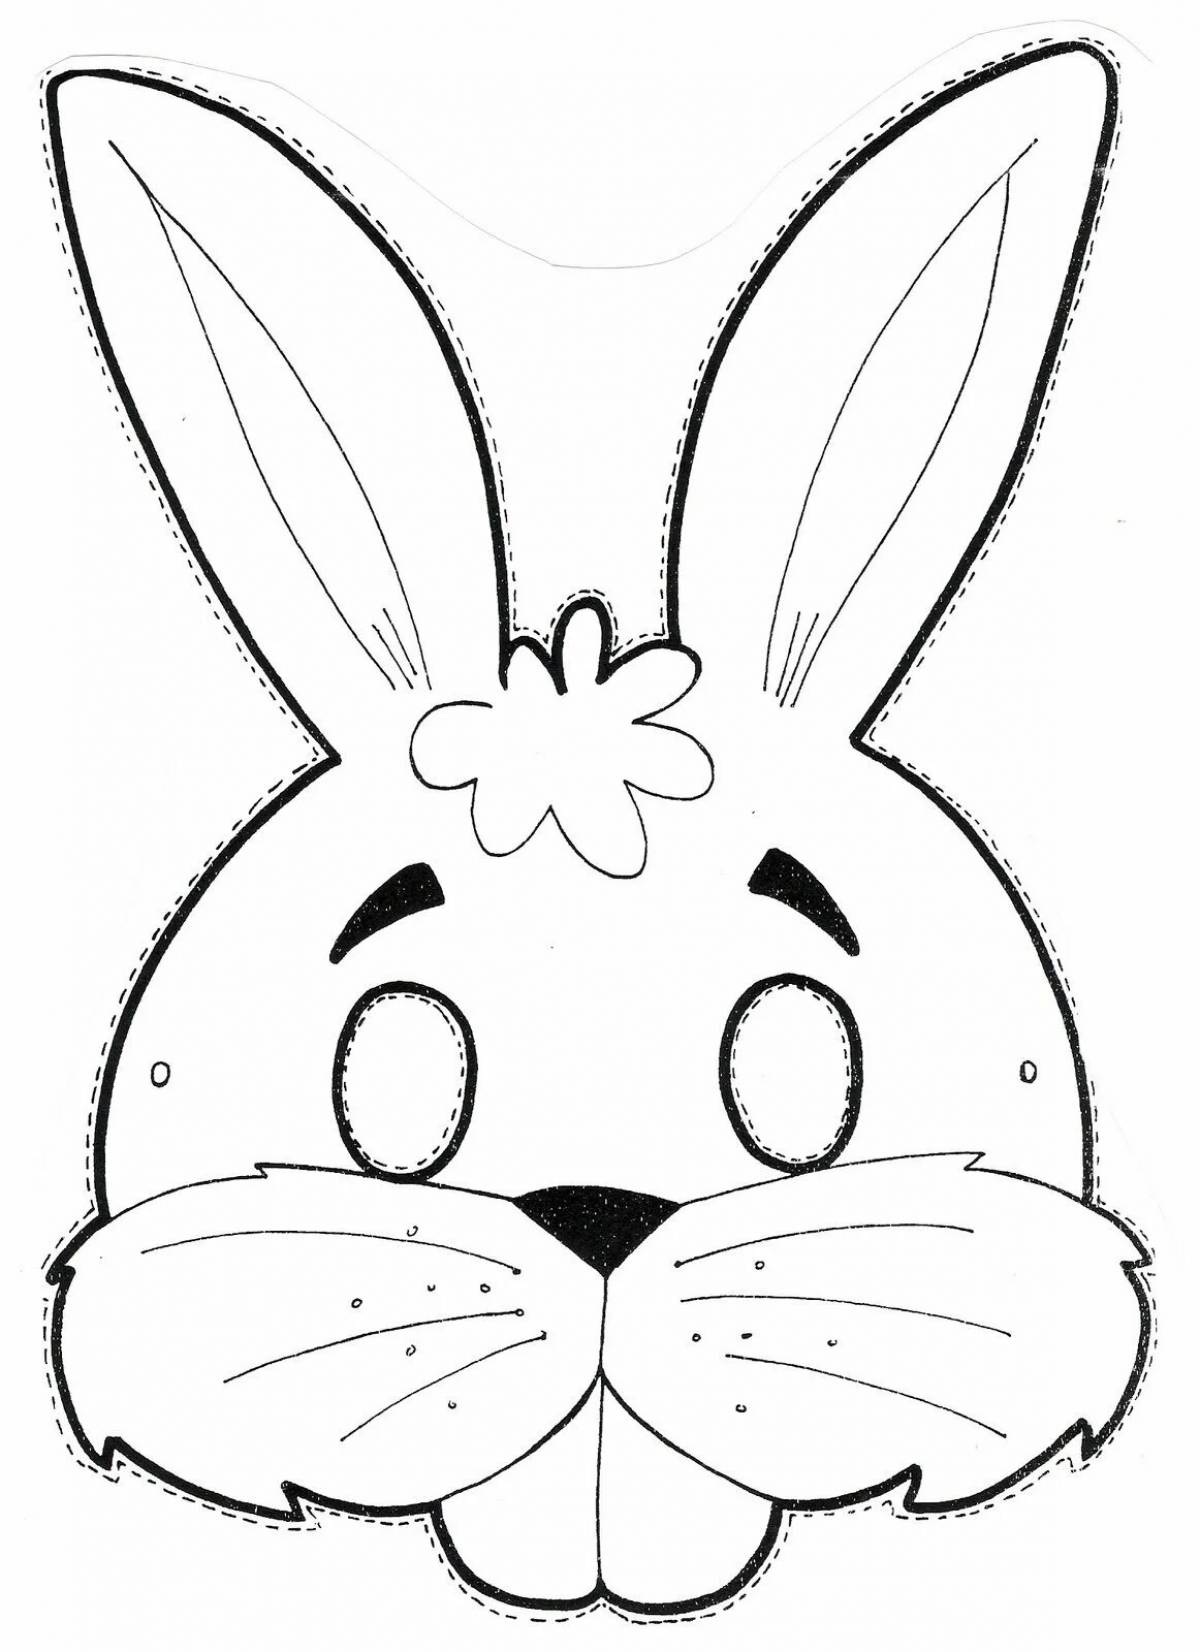 Playable rabbit face coloring page